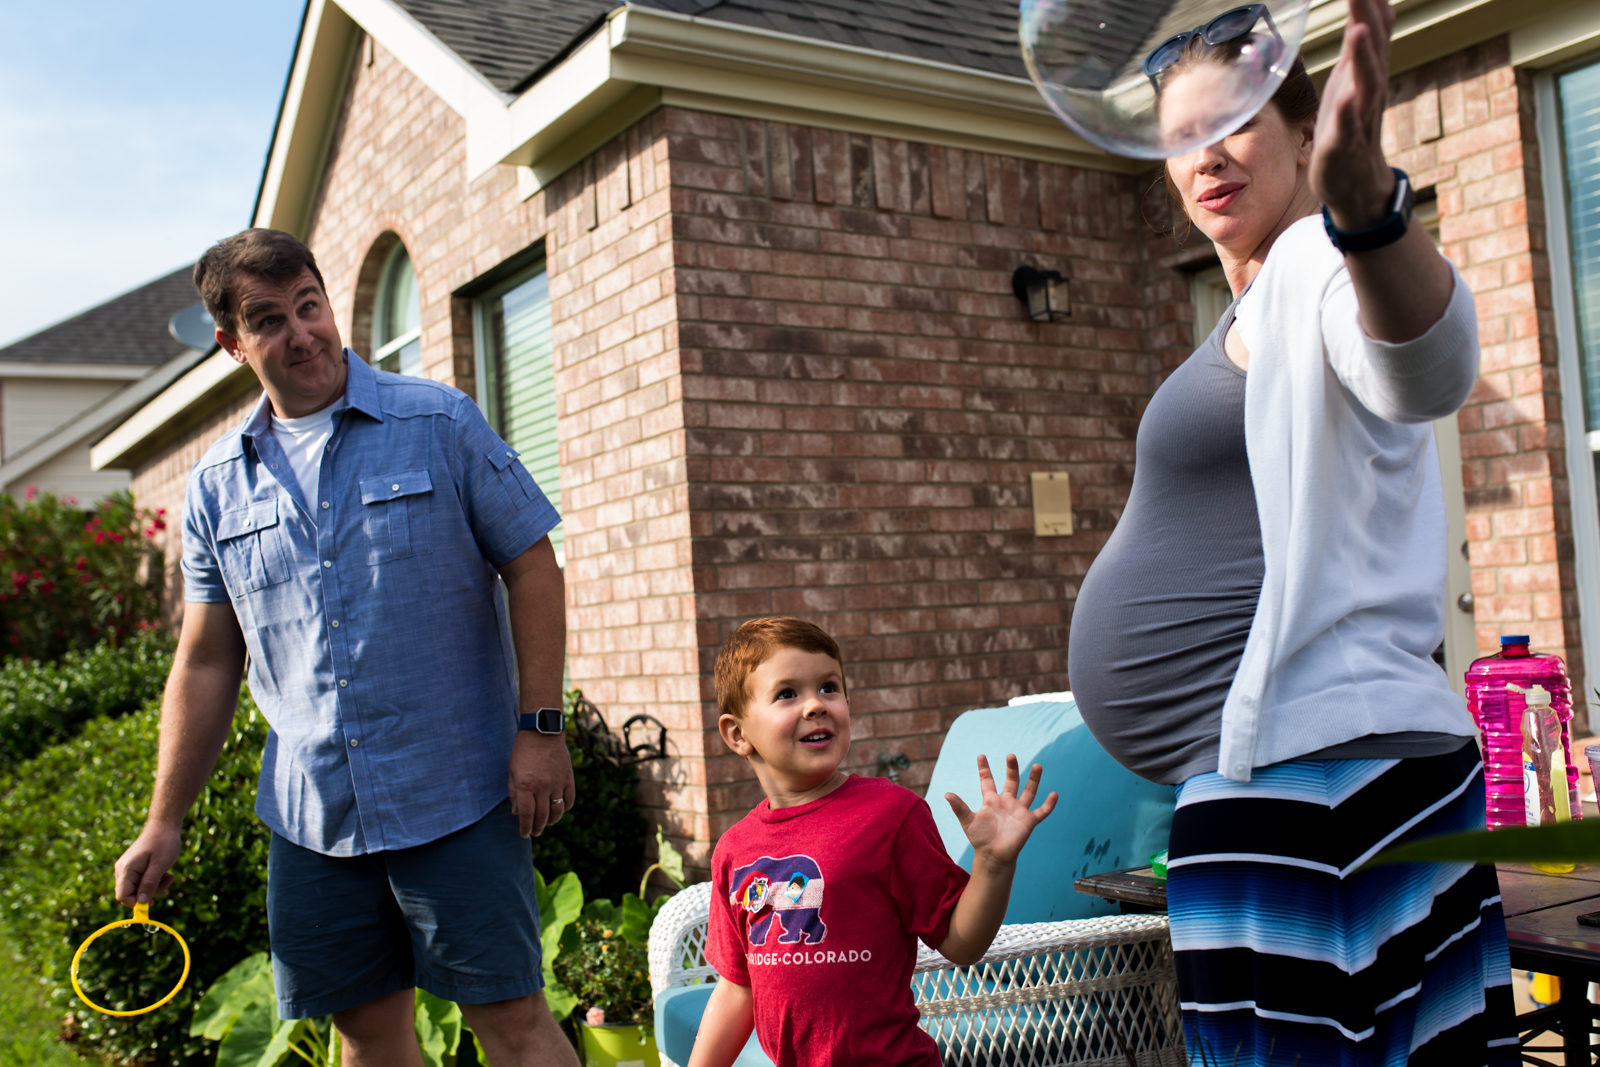 McKinney Photographer Lawren Rose Photography captures a photo of a family of 3 outside in their backyard blowing giant bubbles